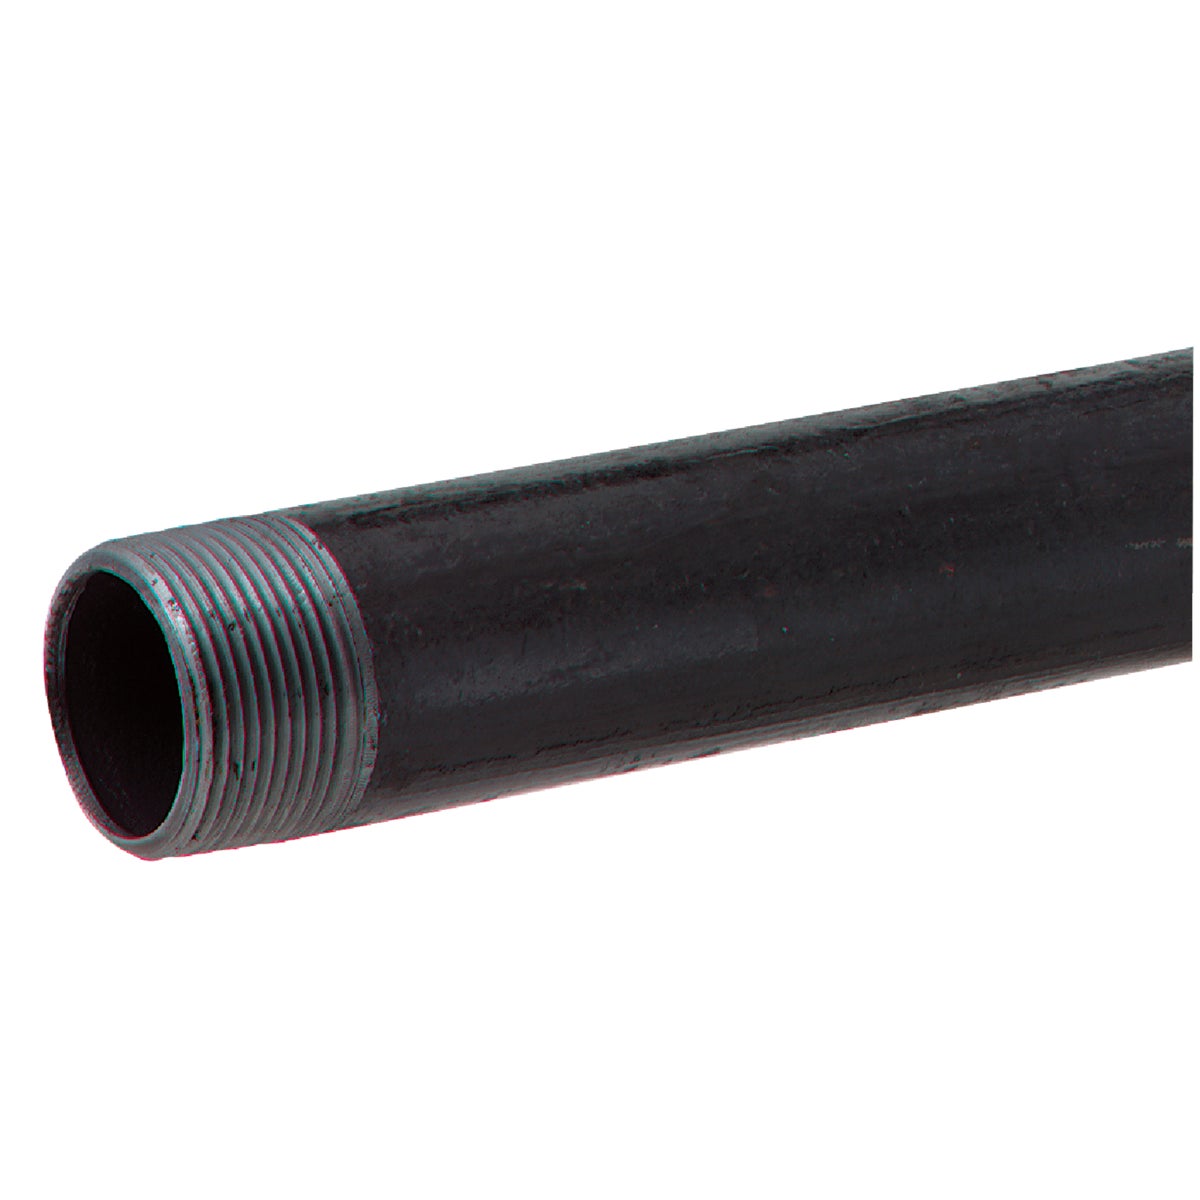 1-1/4X18 BLK RDI-CT PIPE